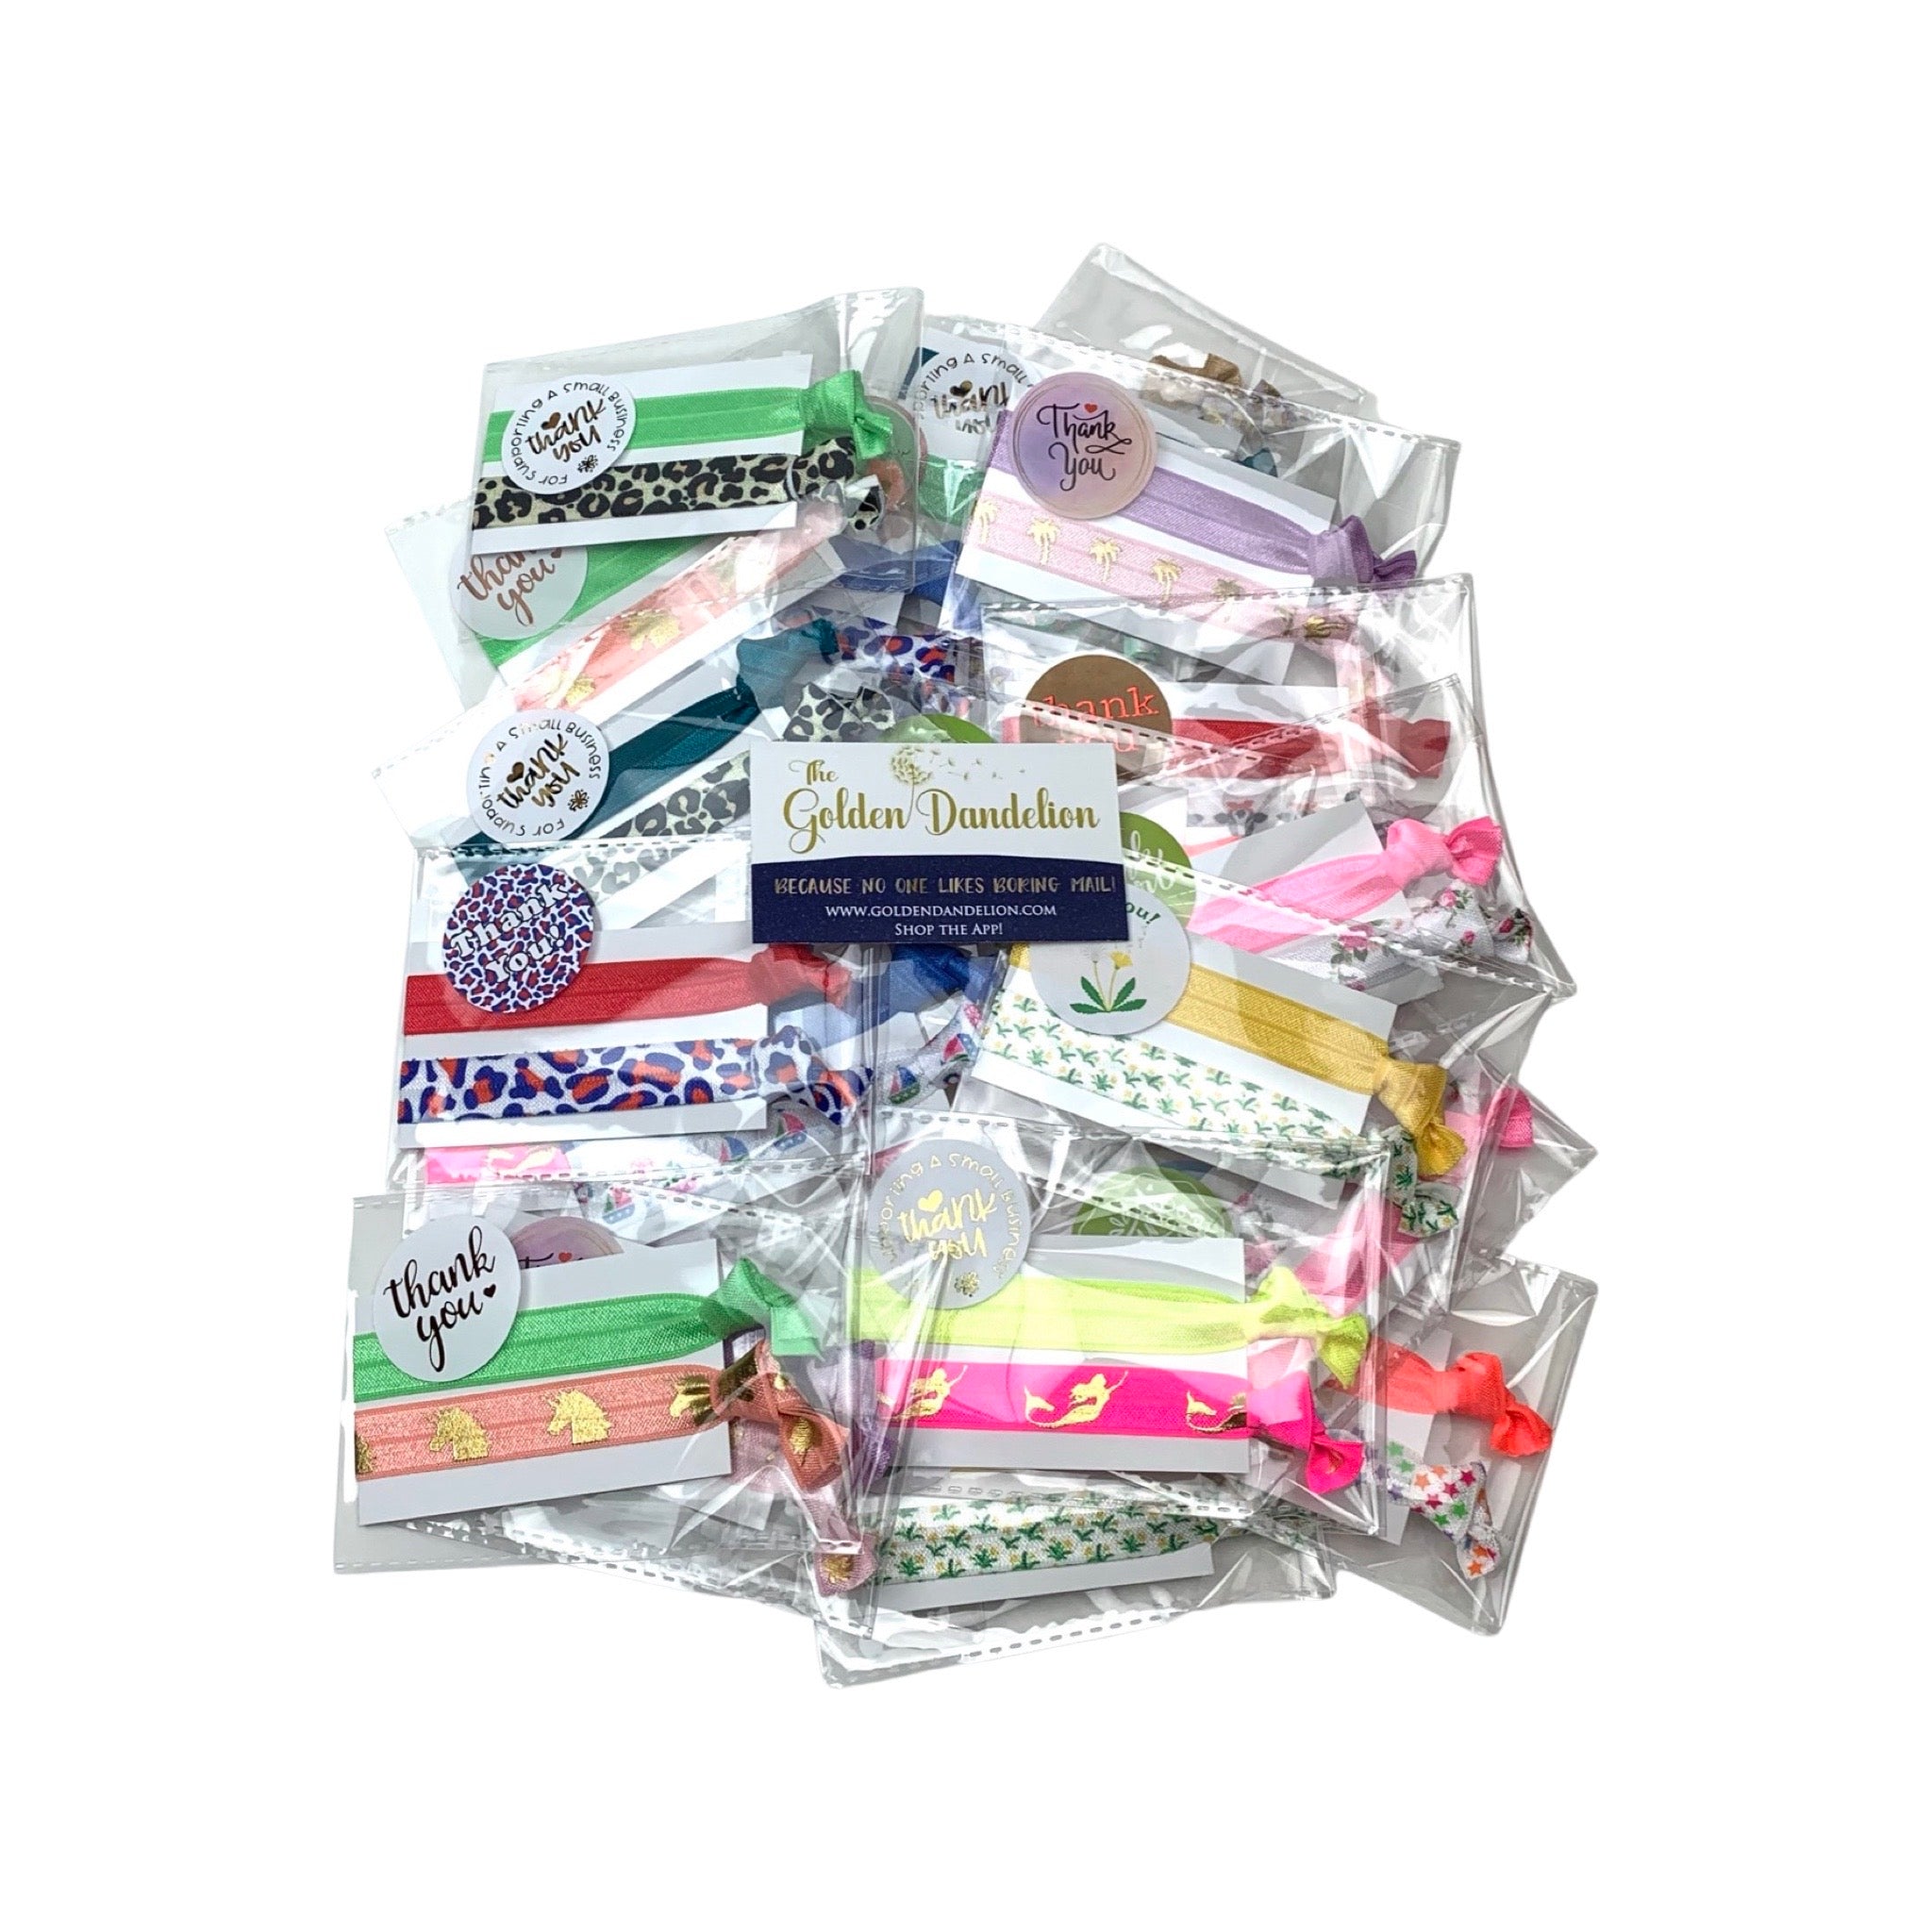 Assorted Hair Tie Bundle Filler Pack, 1 per pack. Now available with Logo Sticker Add On Option!